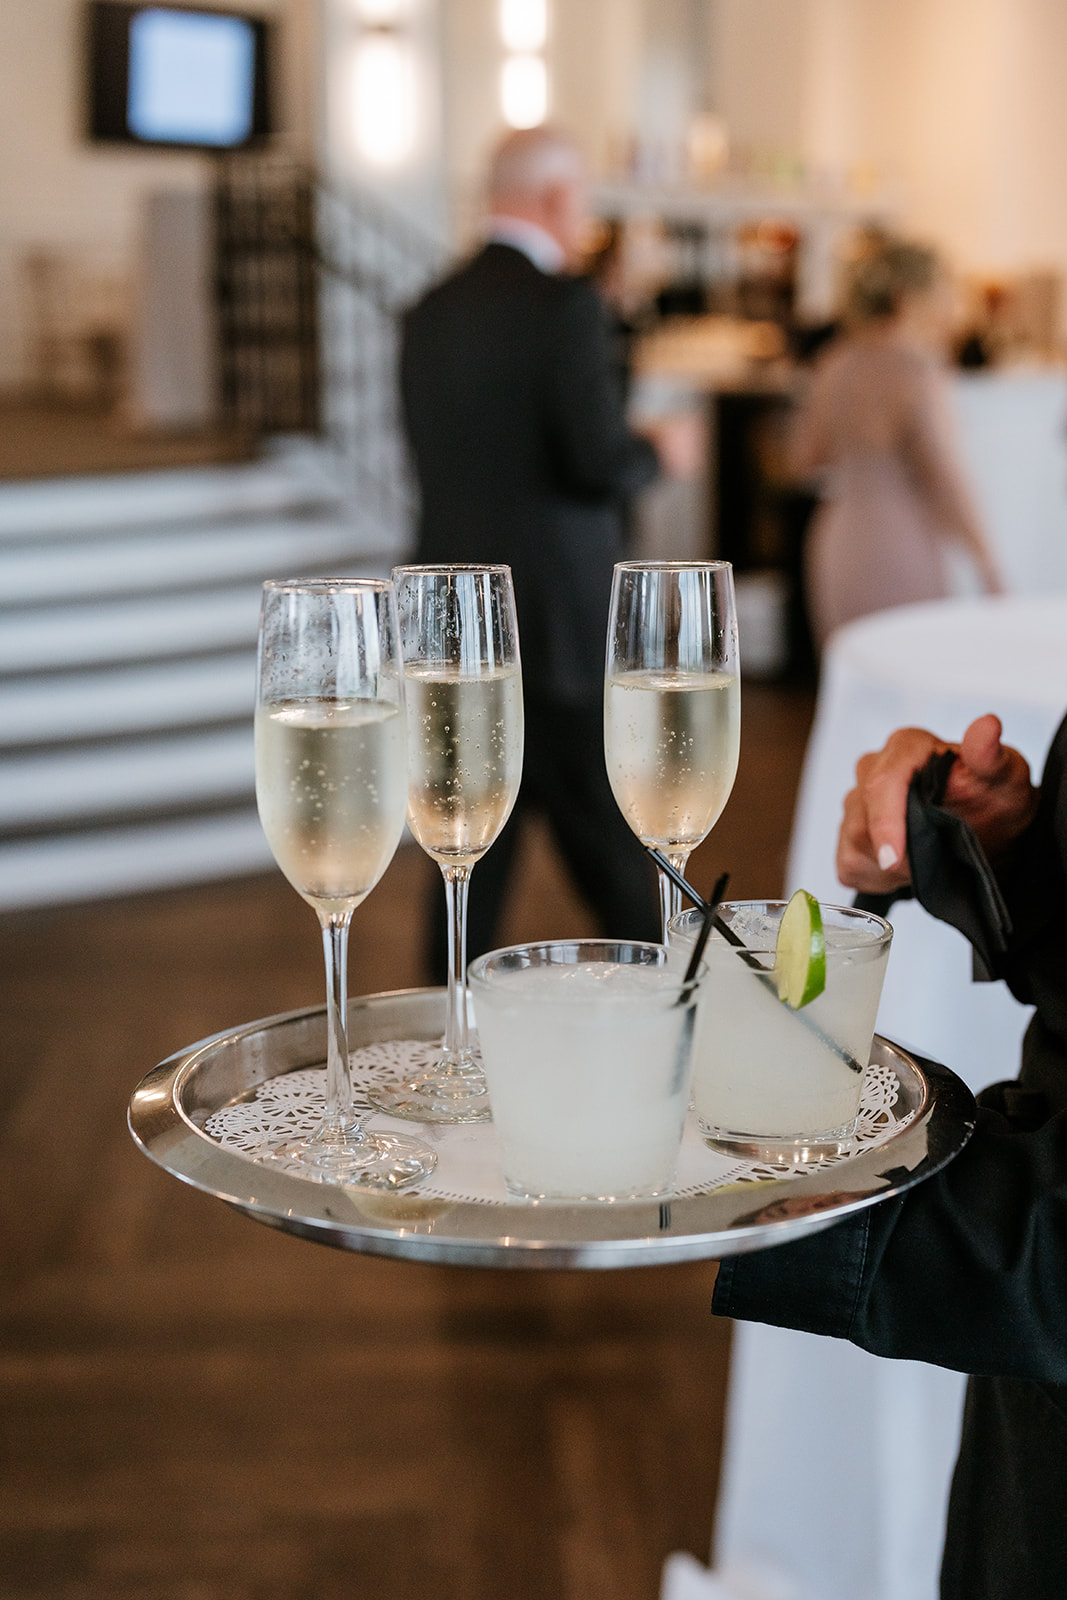 A waiter gracefully holds a tray with three glasses of champagne, ready to serve the sparkling beverages to guests.